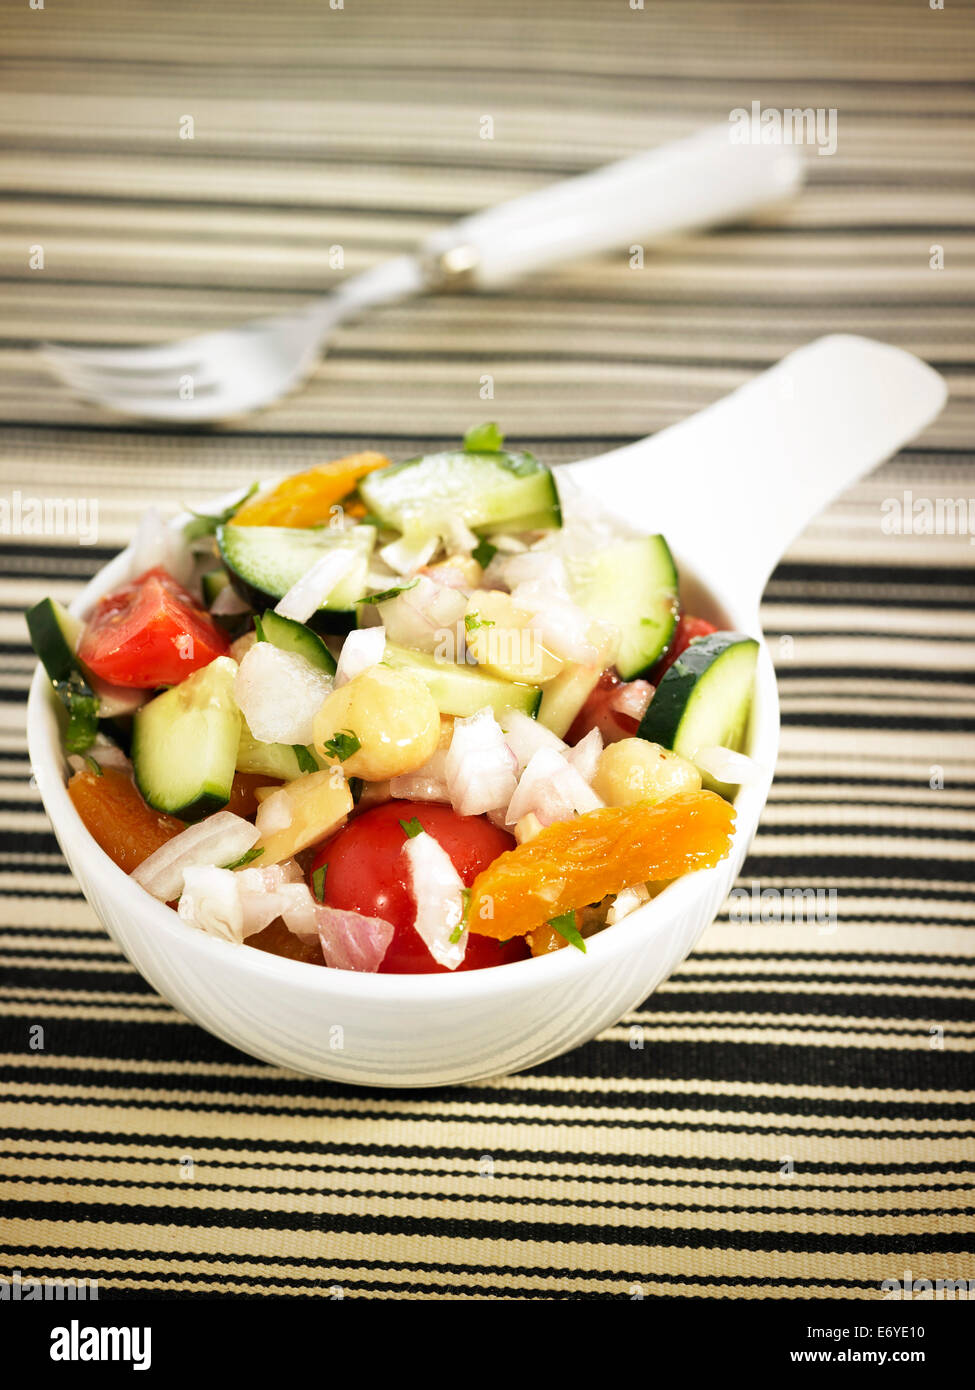 Vegetable and dried apricot salad Stock Photo